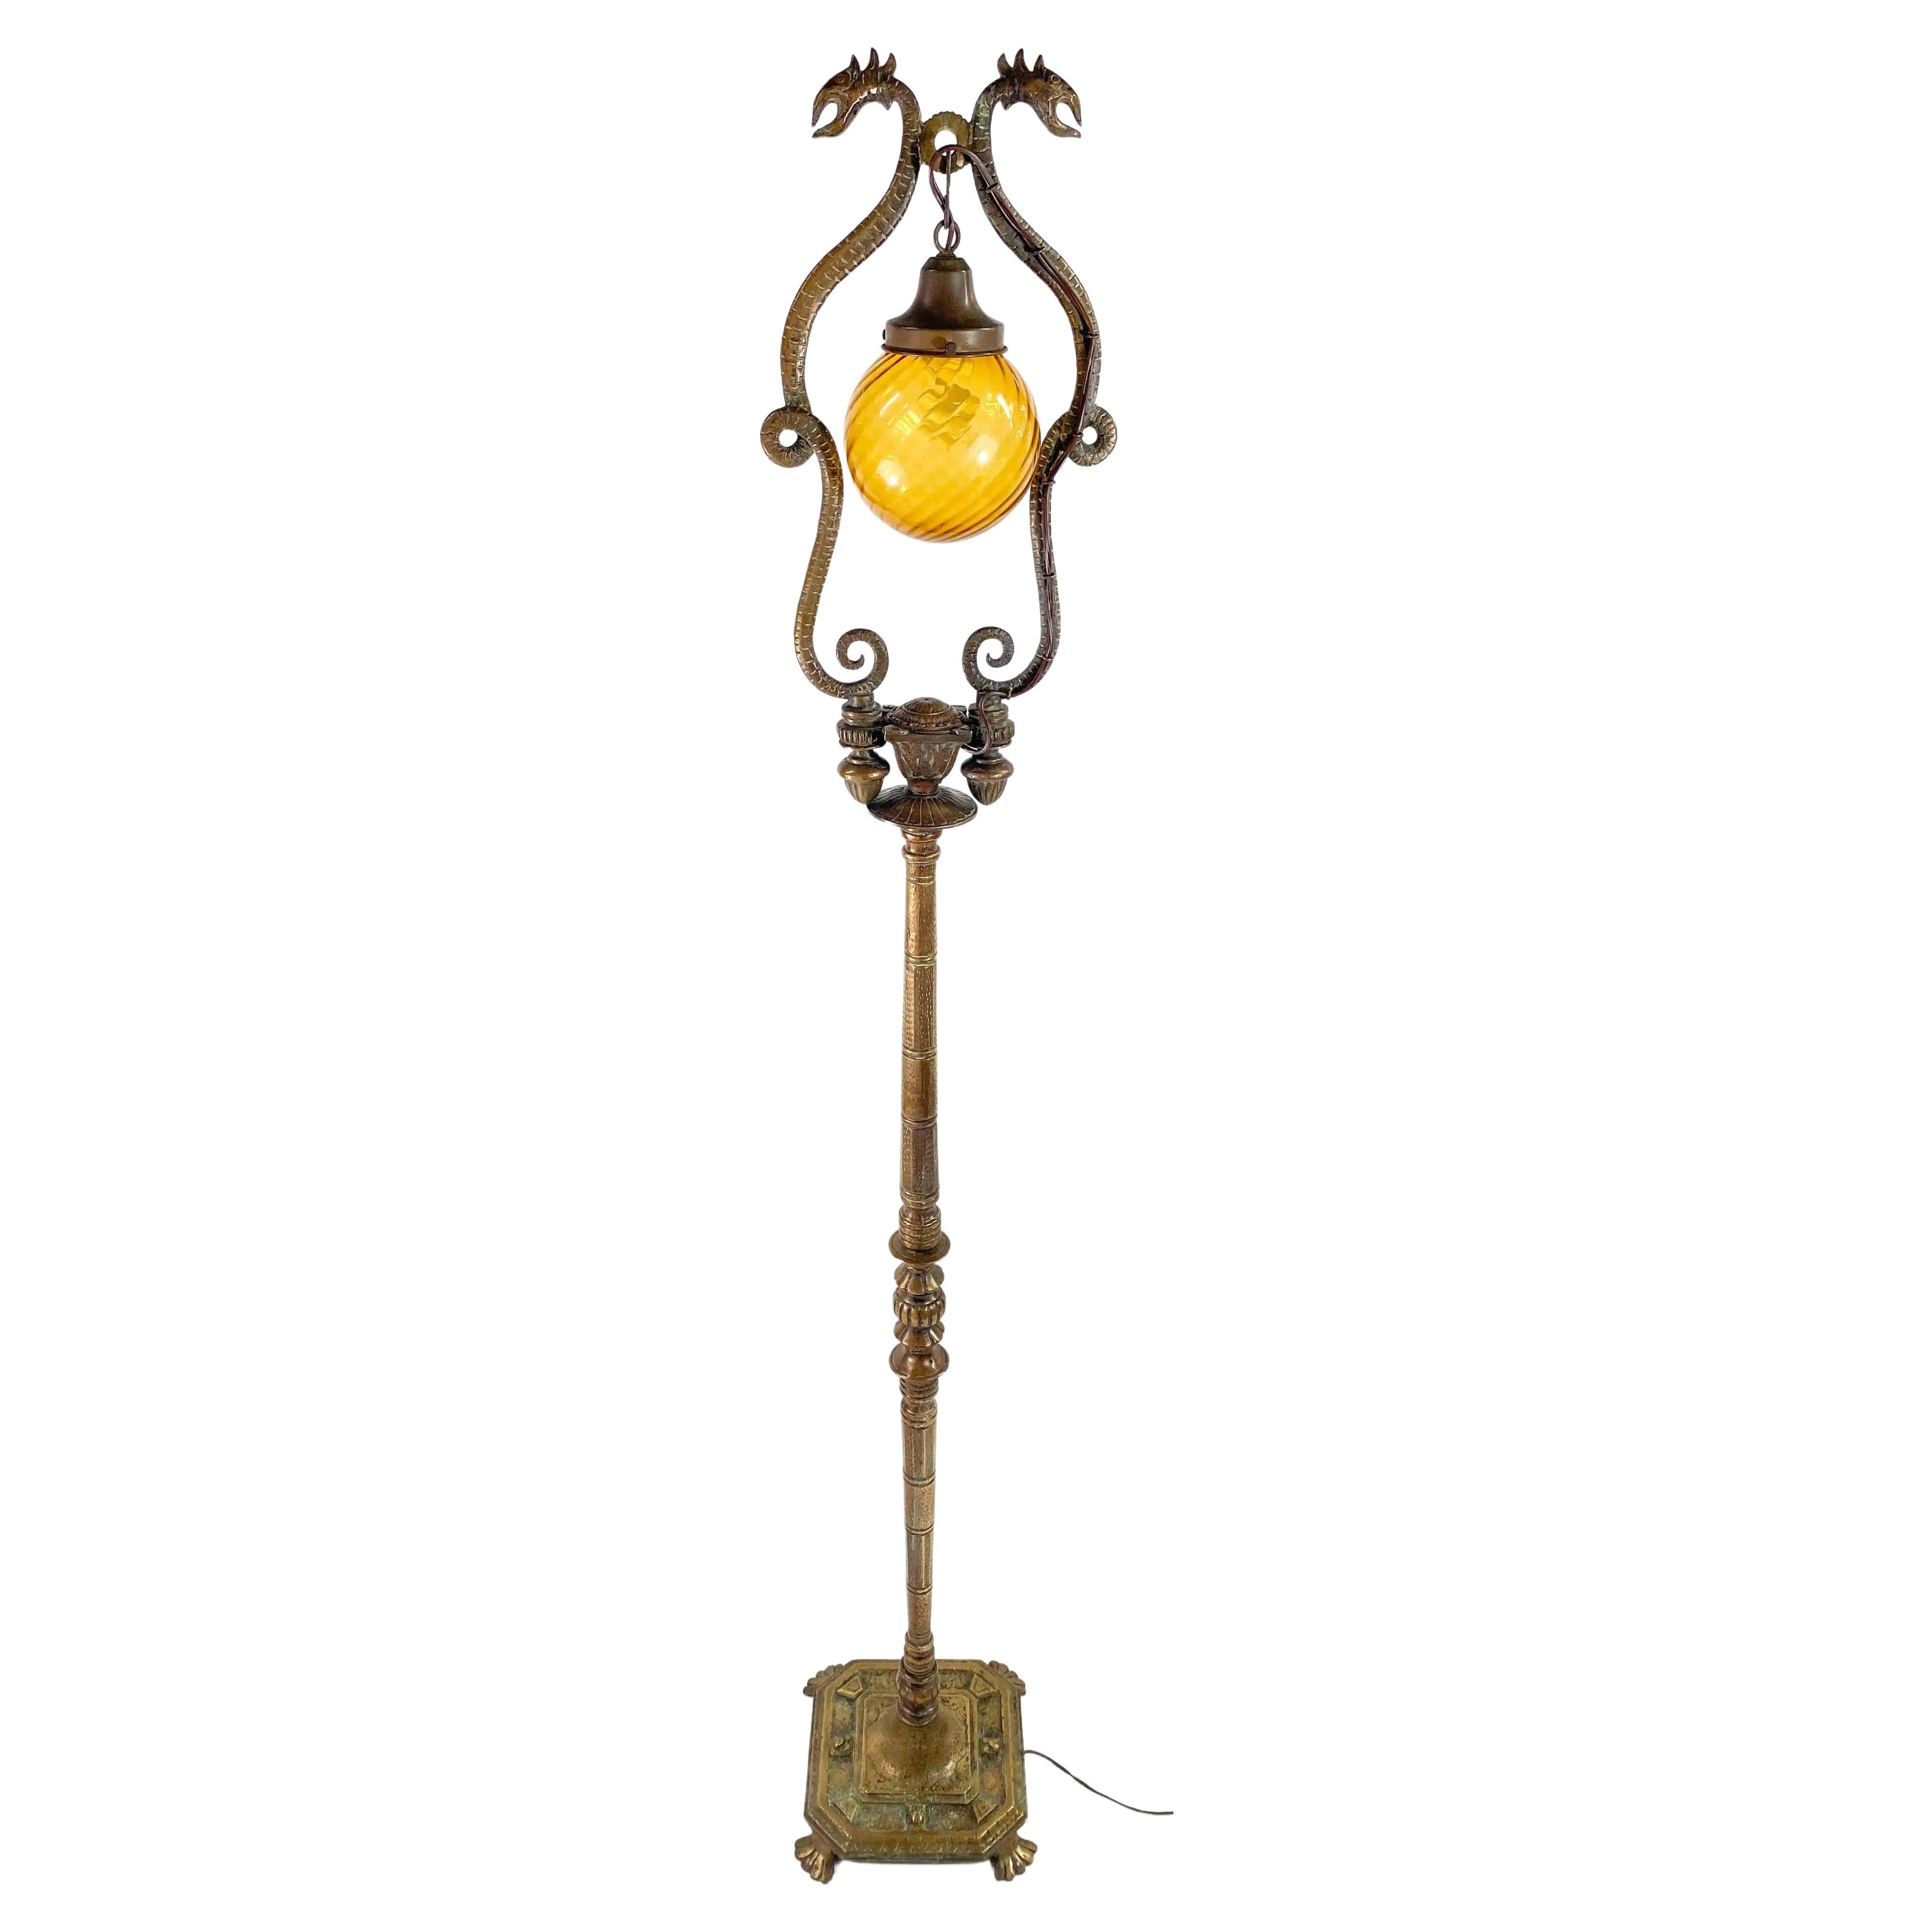 19th Century French Rococo Revival Style Bronze Patinated Dragons Floor Lamp For Sale